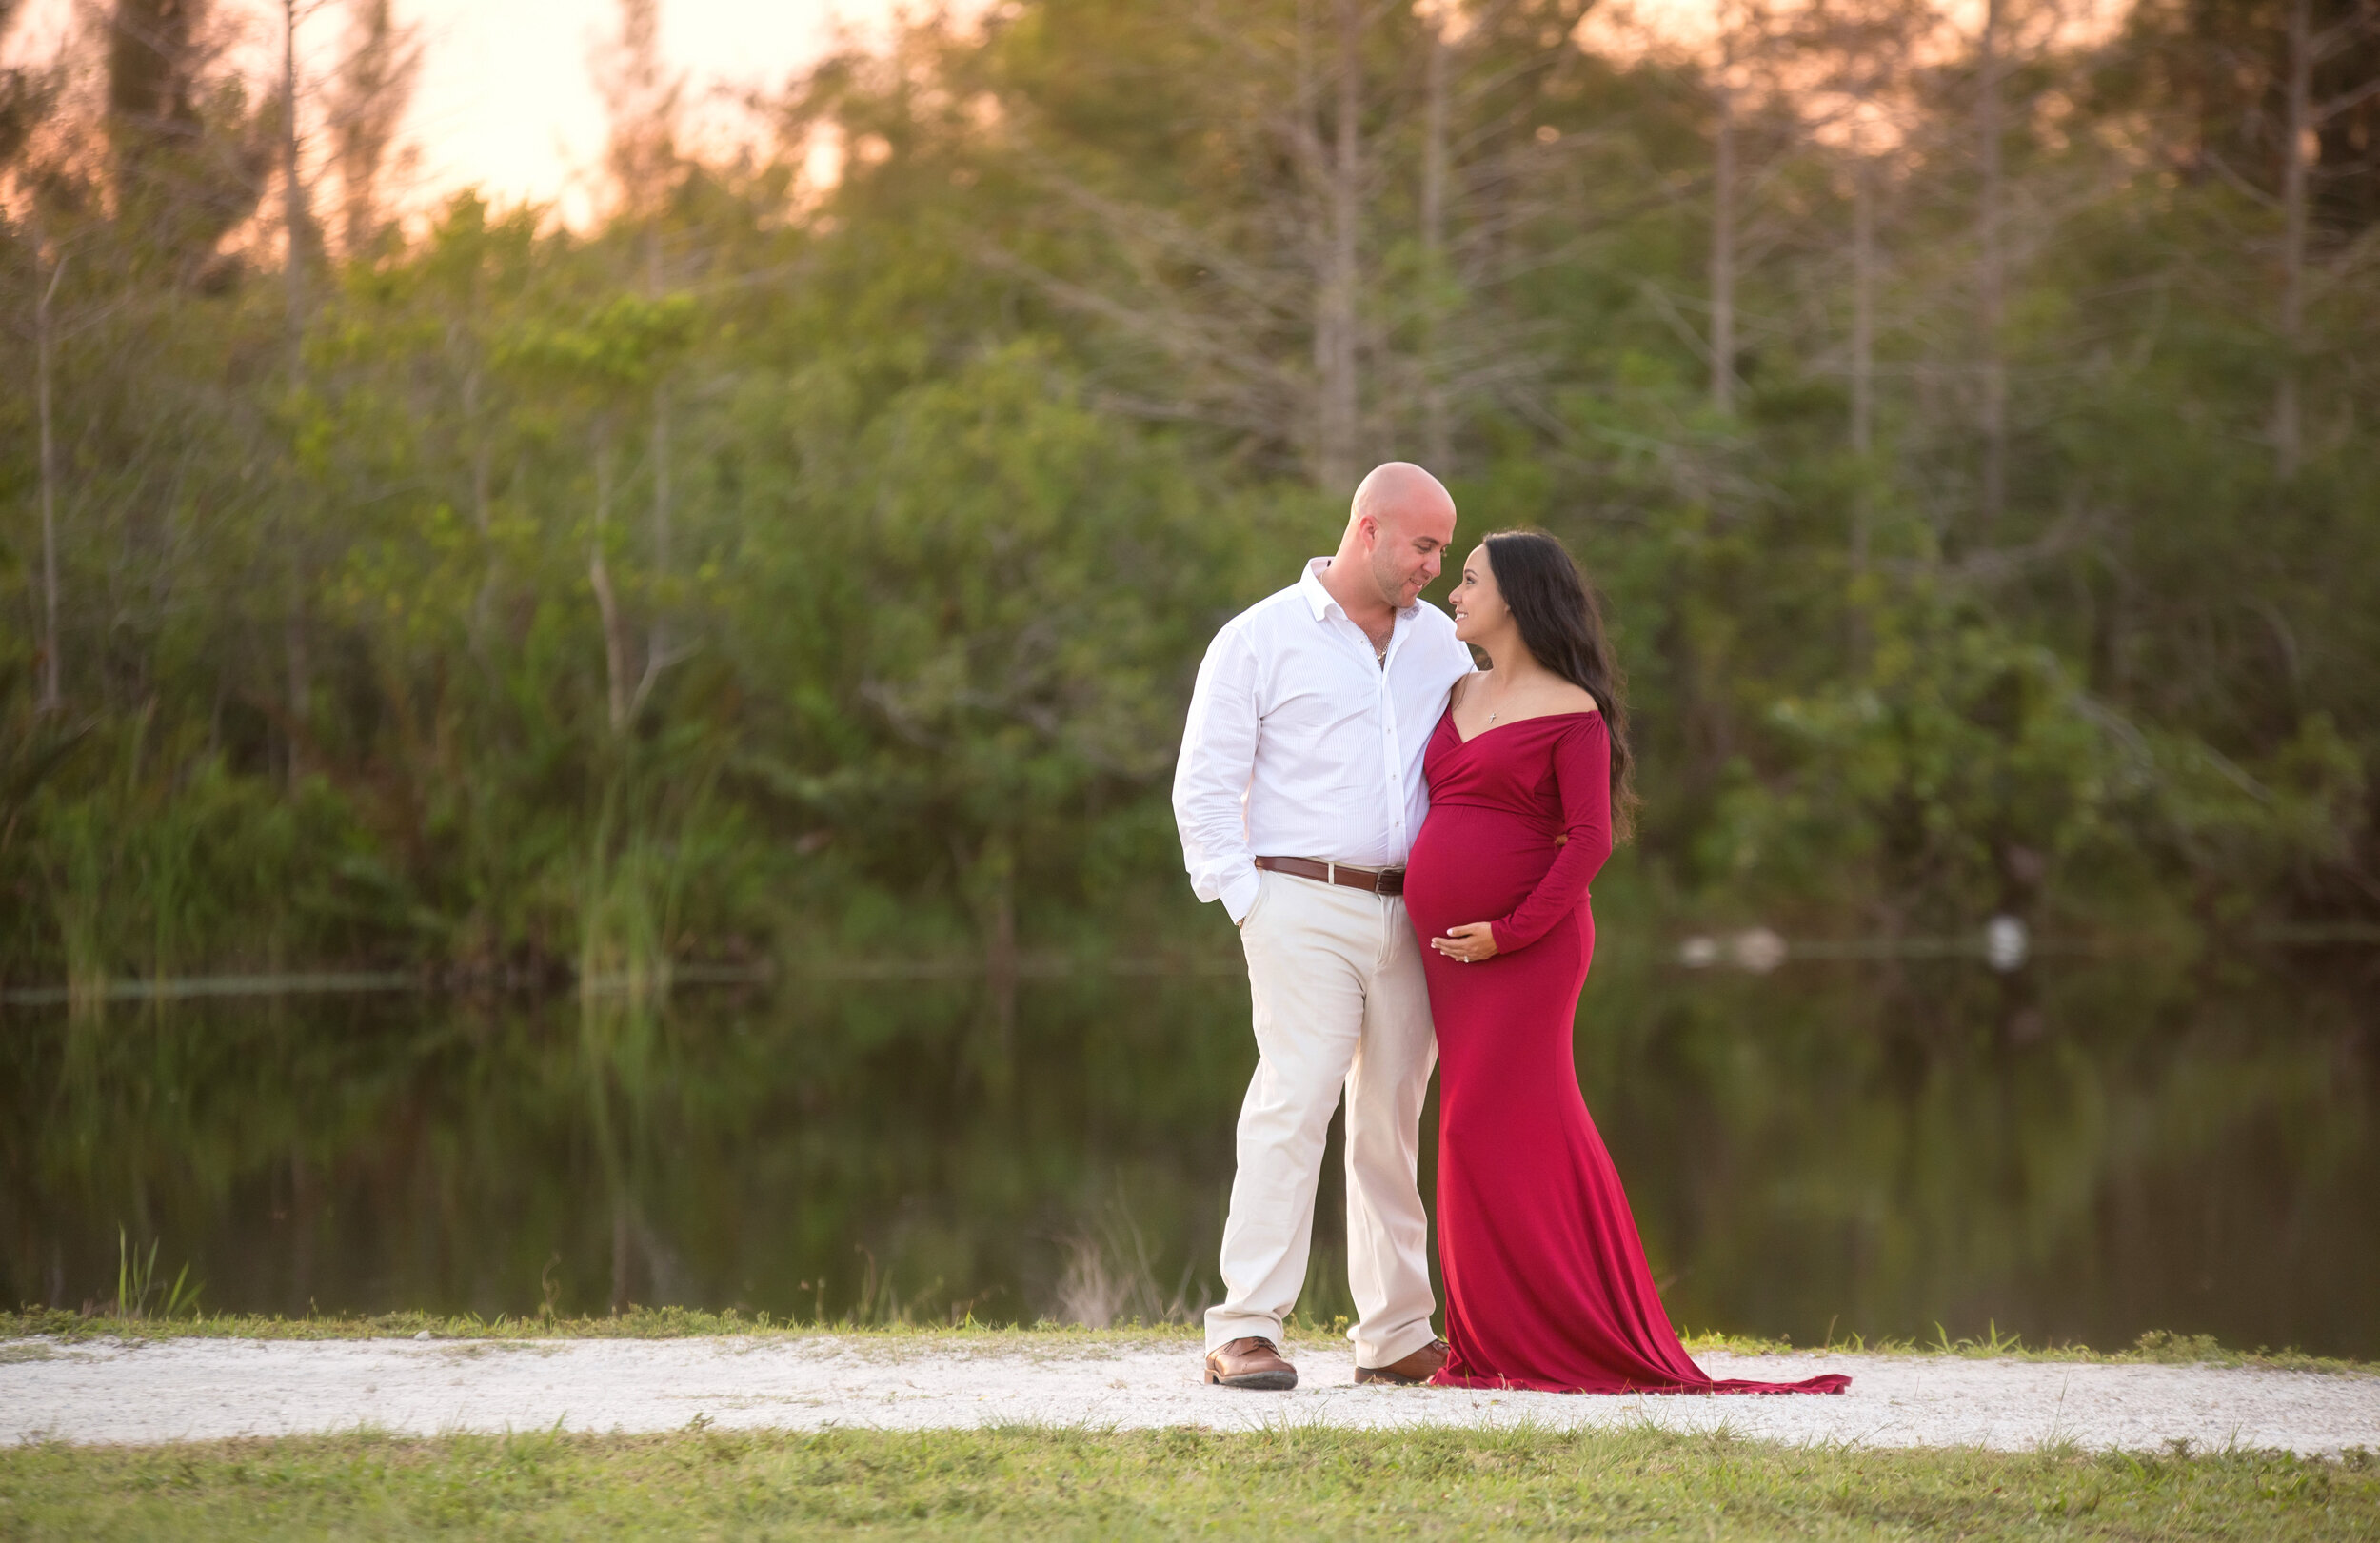 maternity-south-florida-maternity-photographer-west-palm-beach-boca-raton-captured-moments-by-dawn-photography-009.jpg